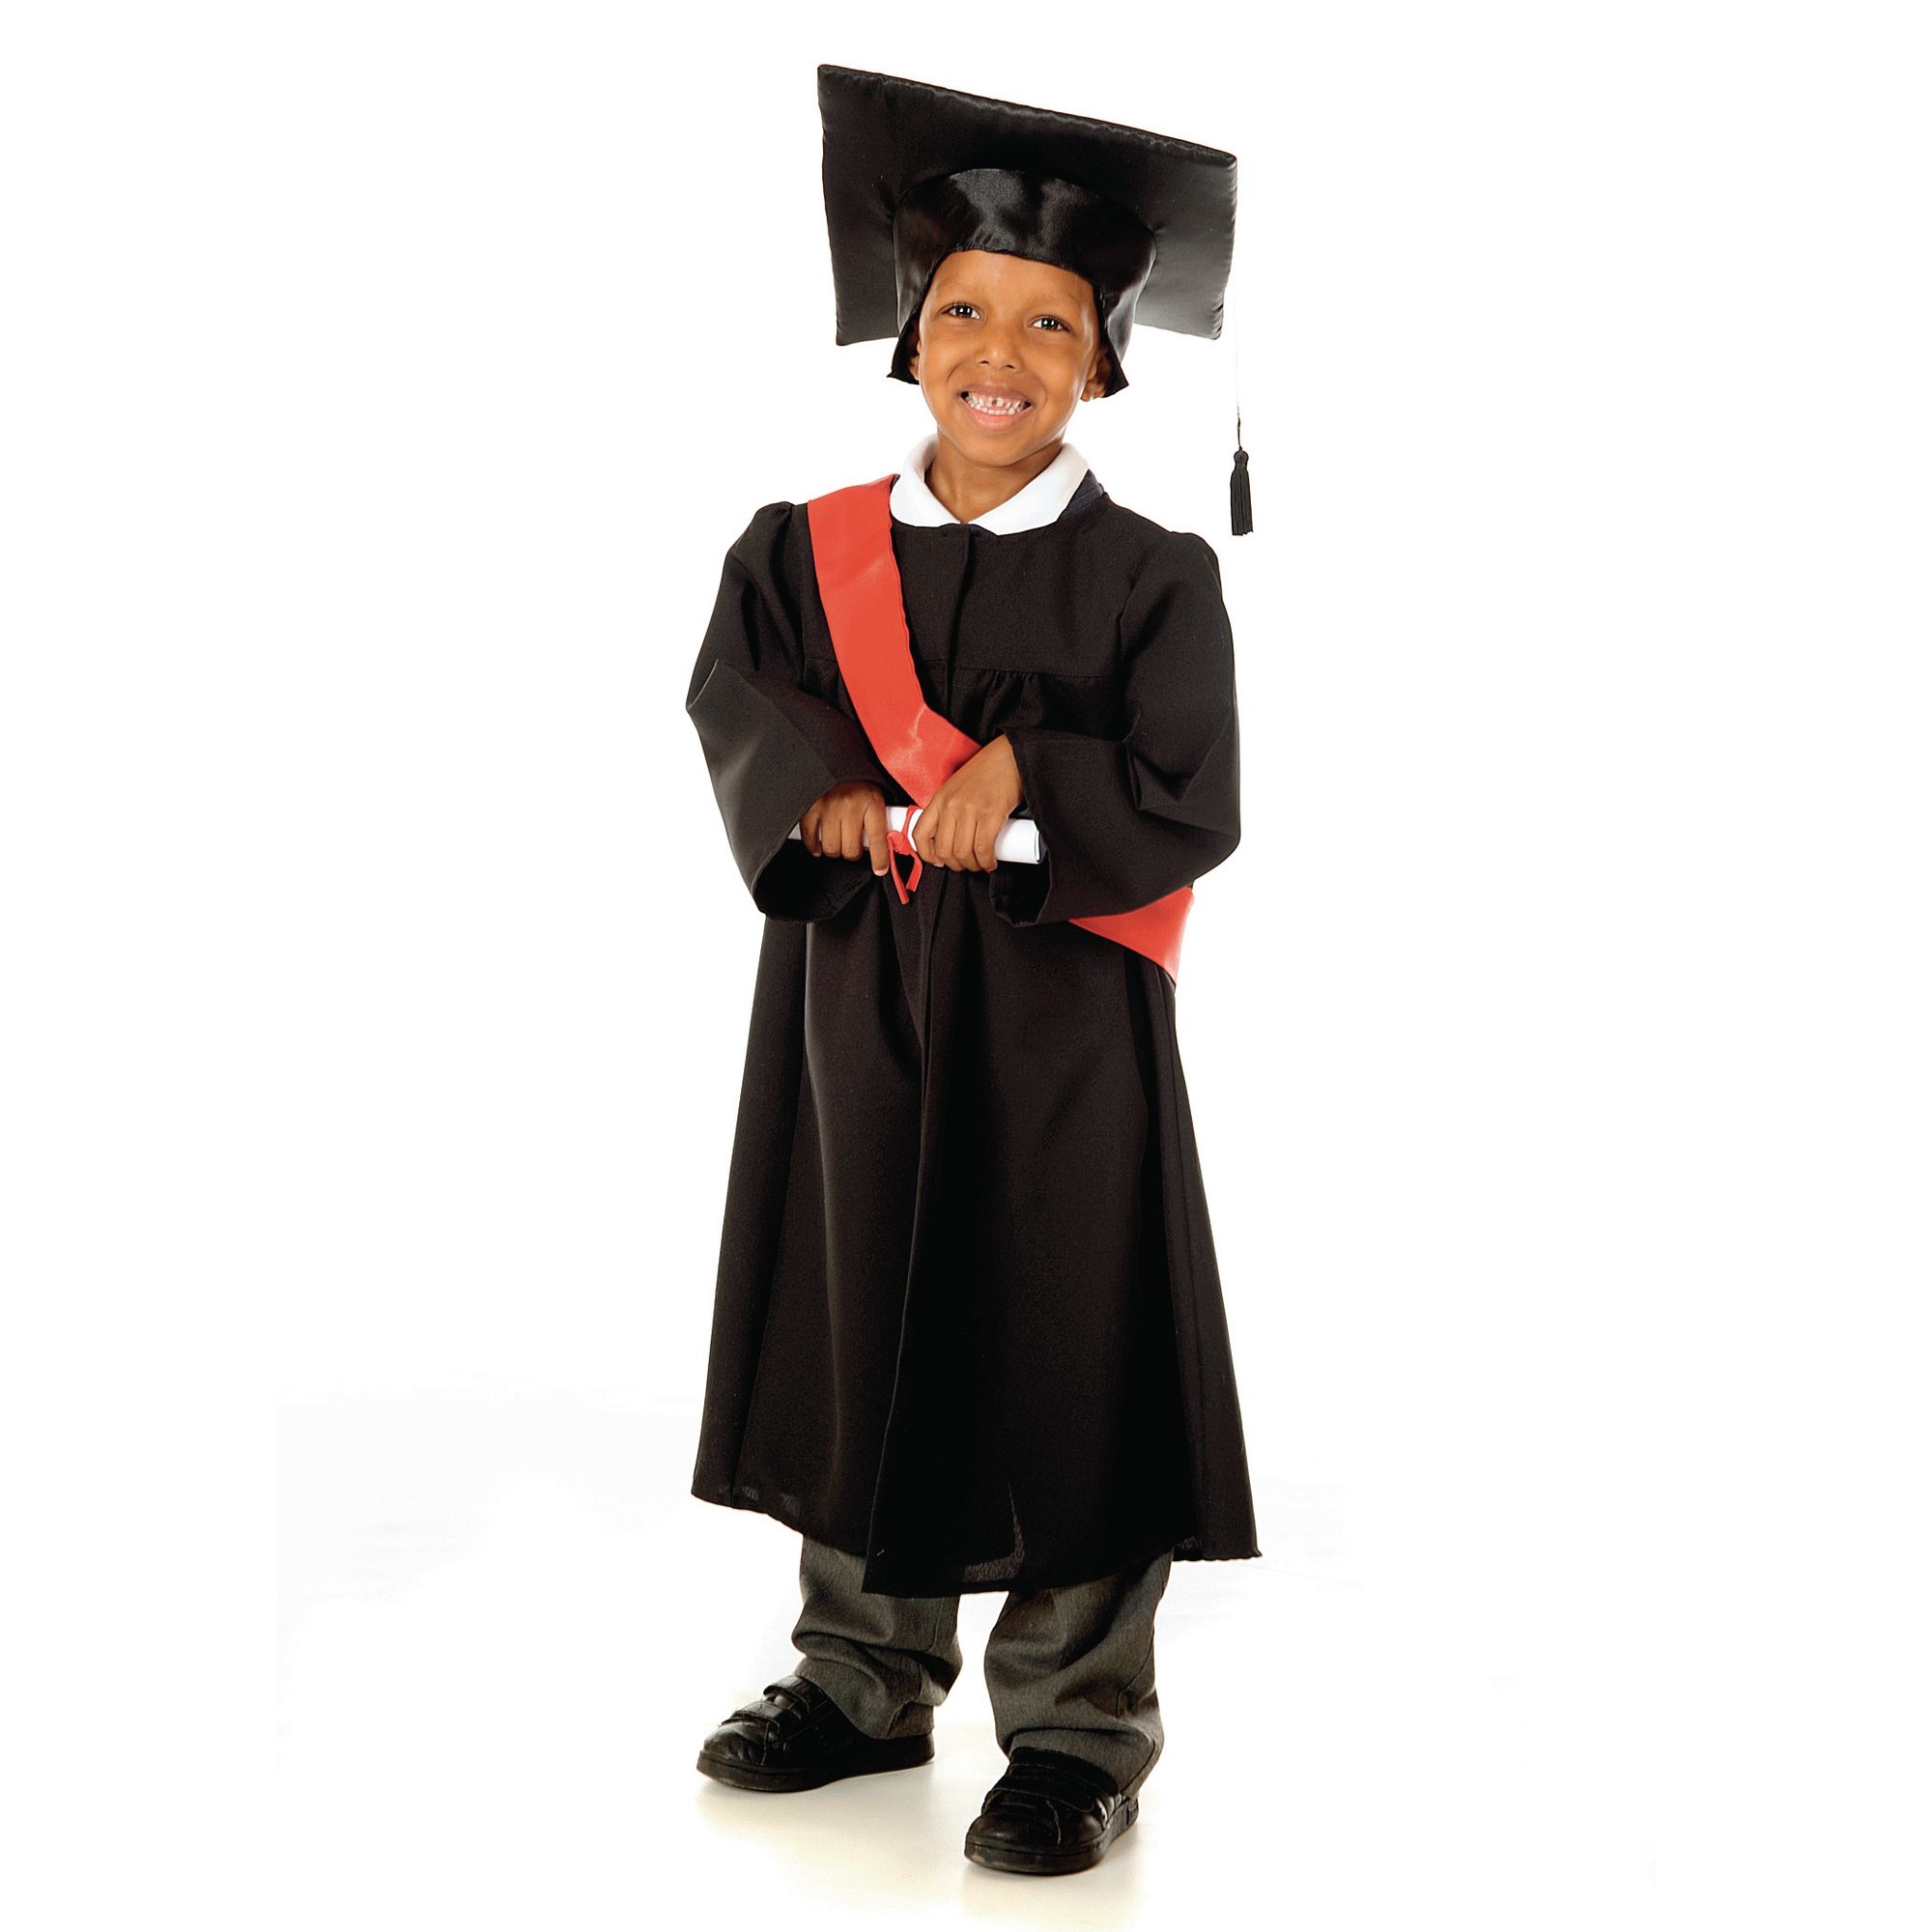 Graduation Gowns - Black - 3-5 Years